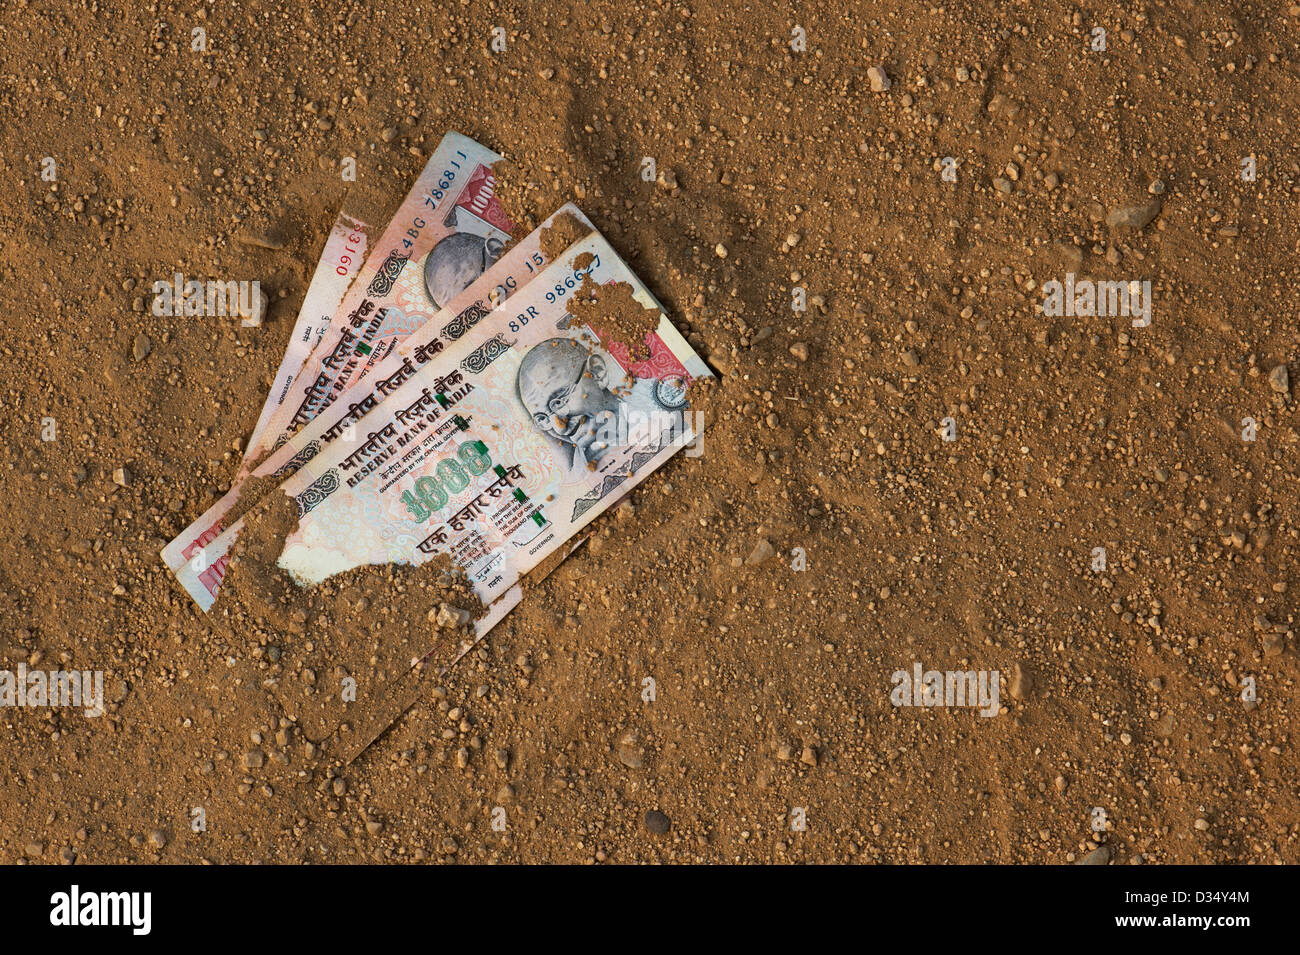 Indian thousand rupee notes on a dirt track. India Stock Photo